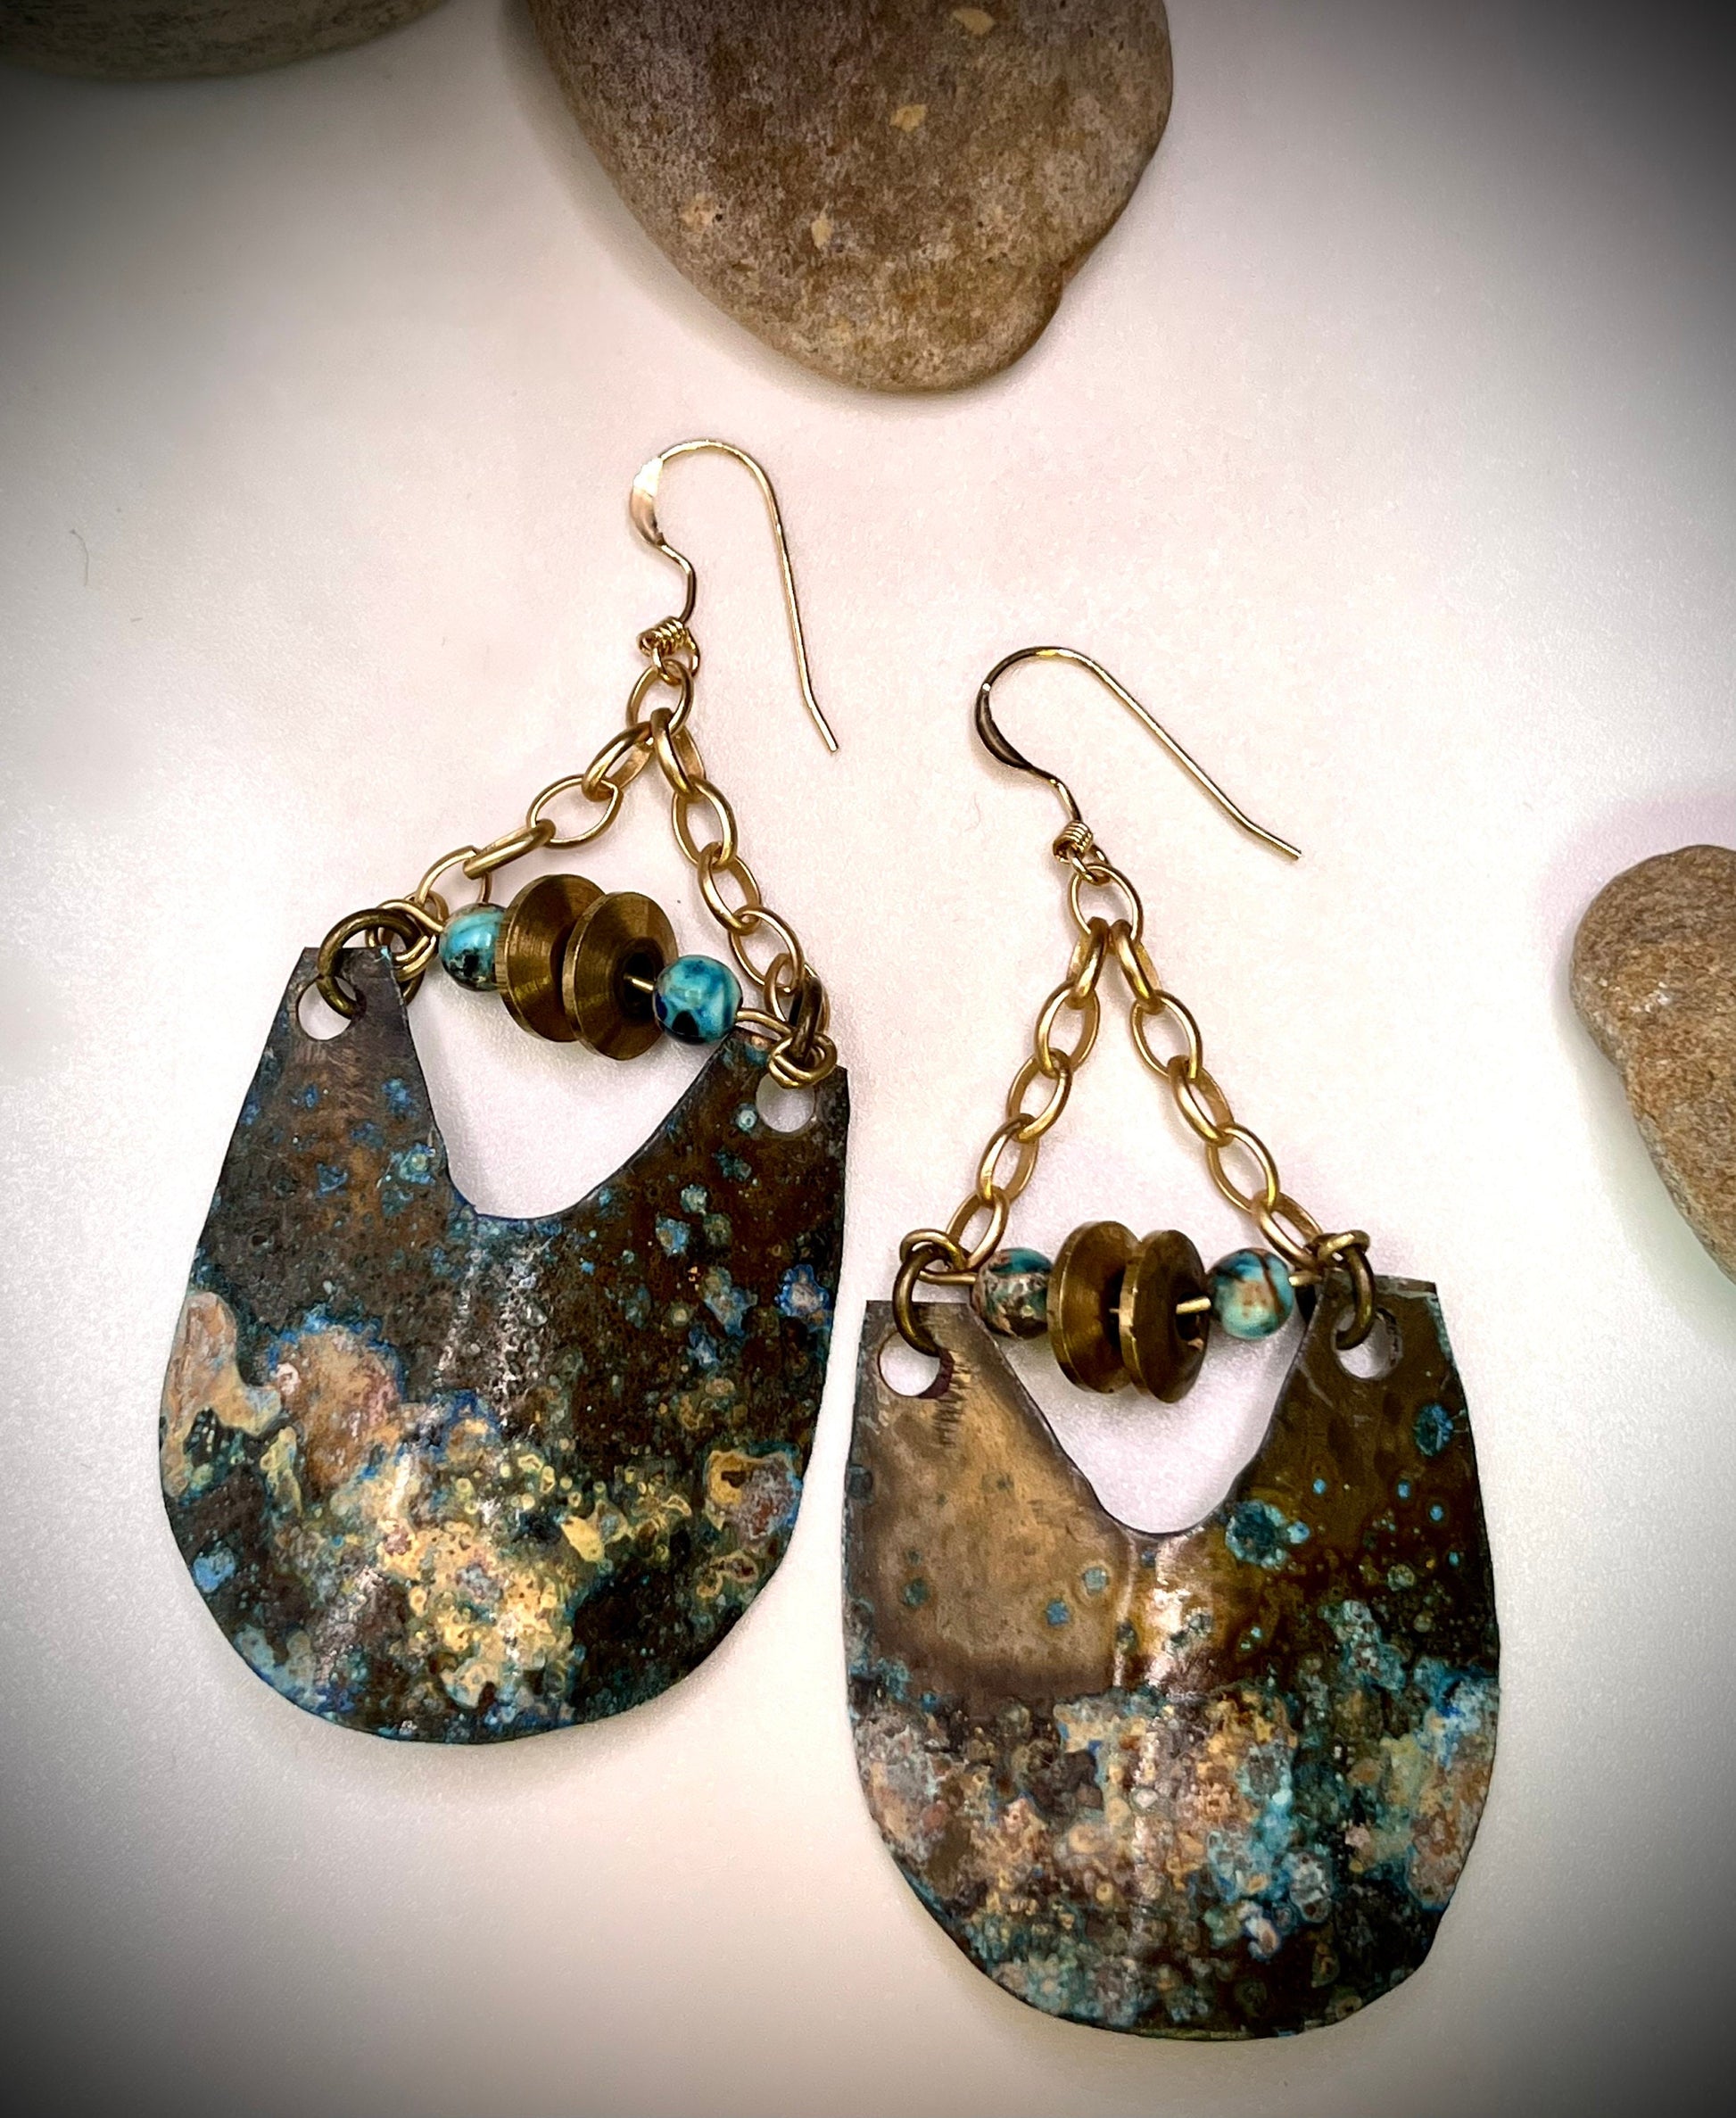 Brass earrings with patina